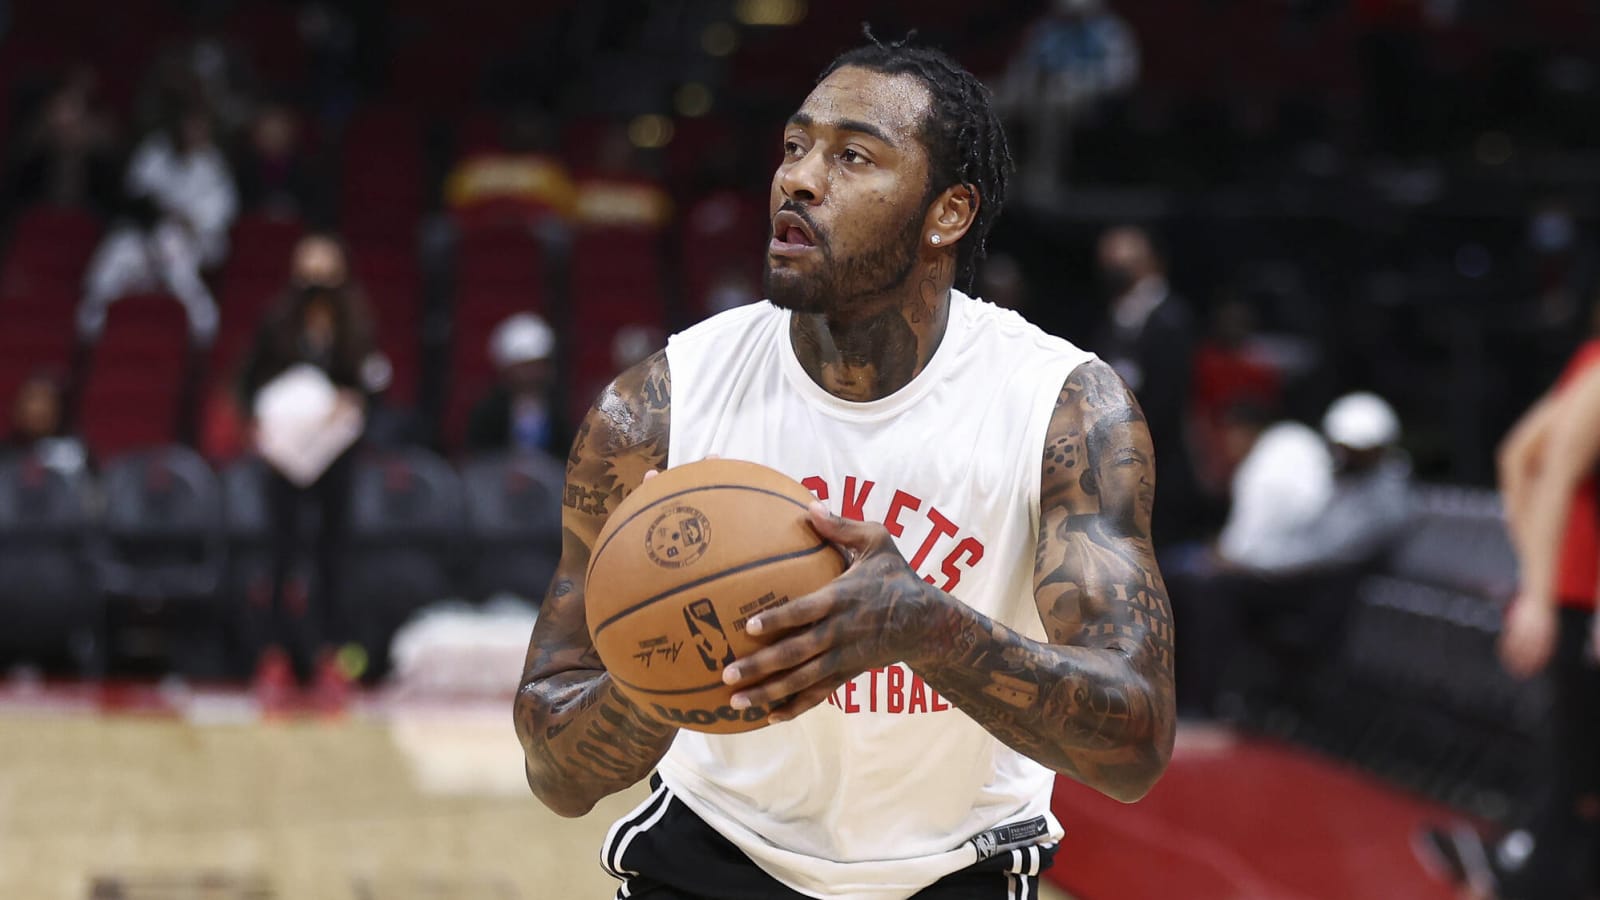 NBA analyst says the Nets need John Wall instead of Kyrie Irving